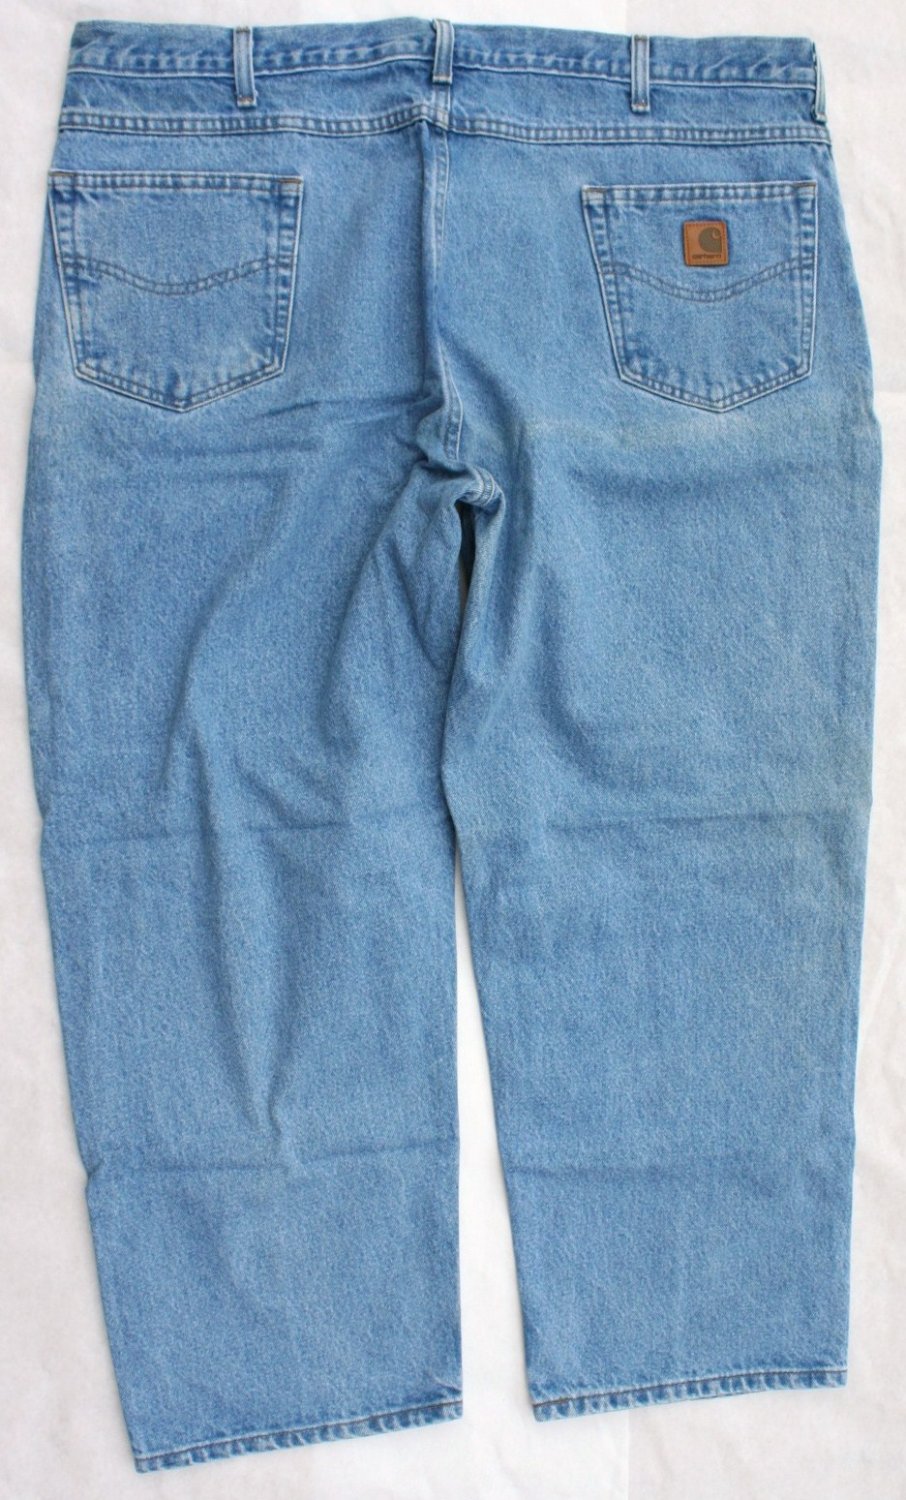 Used Carhartt B160 STW Men’s Relaxed Fit Work Jean 44 x 28